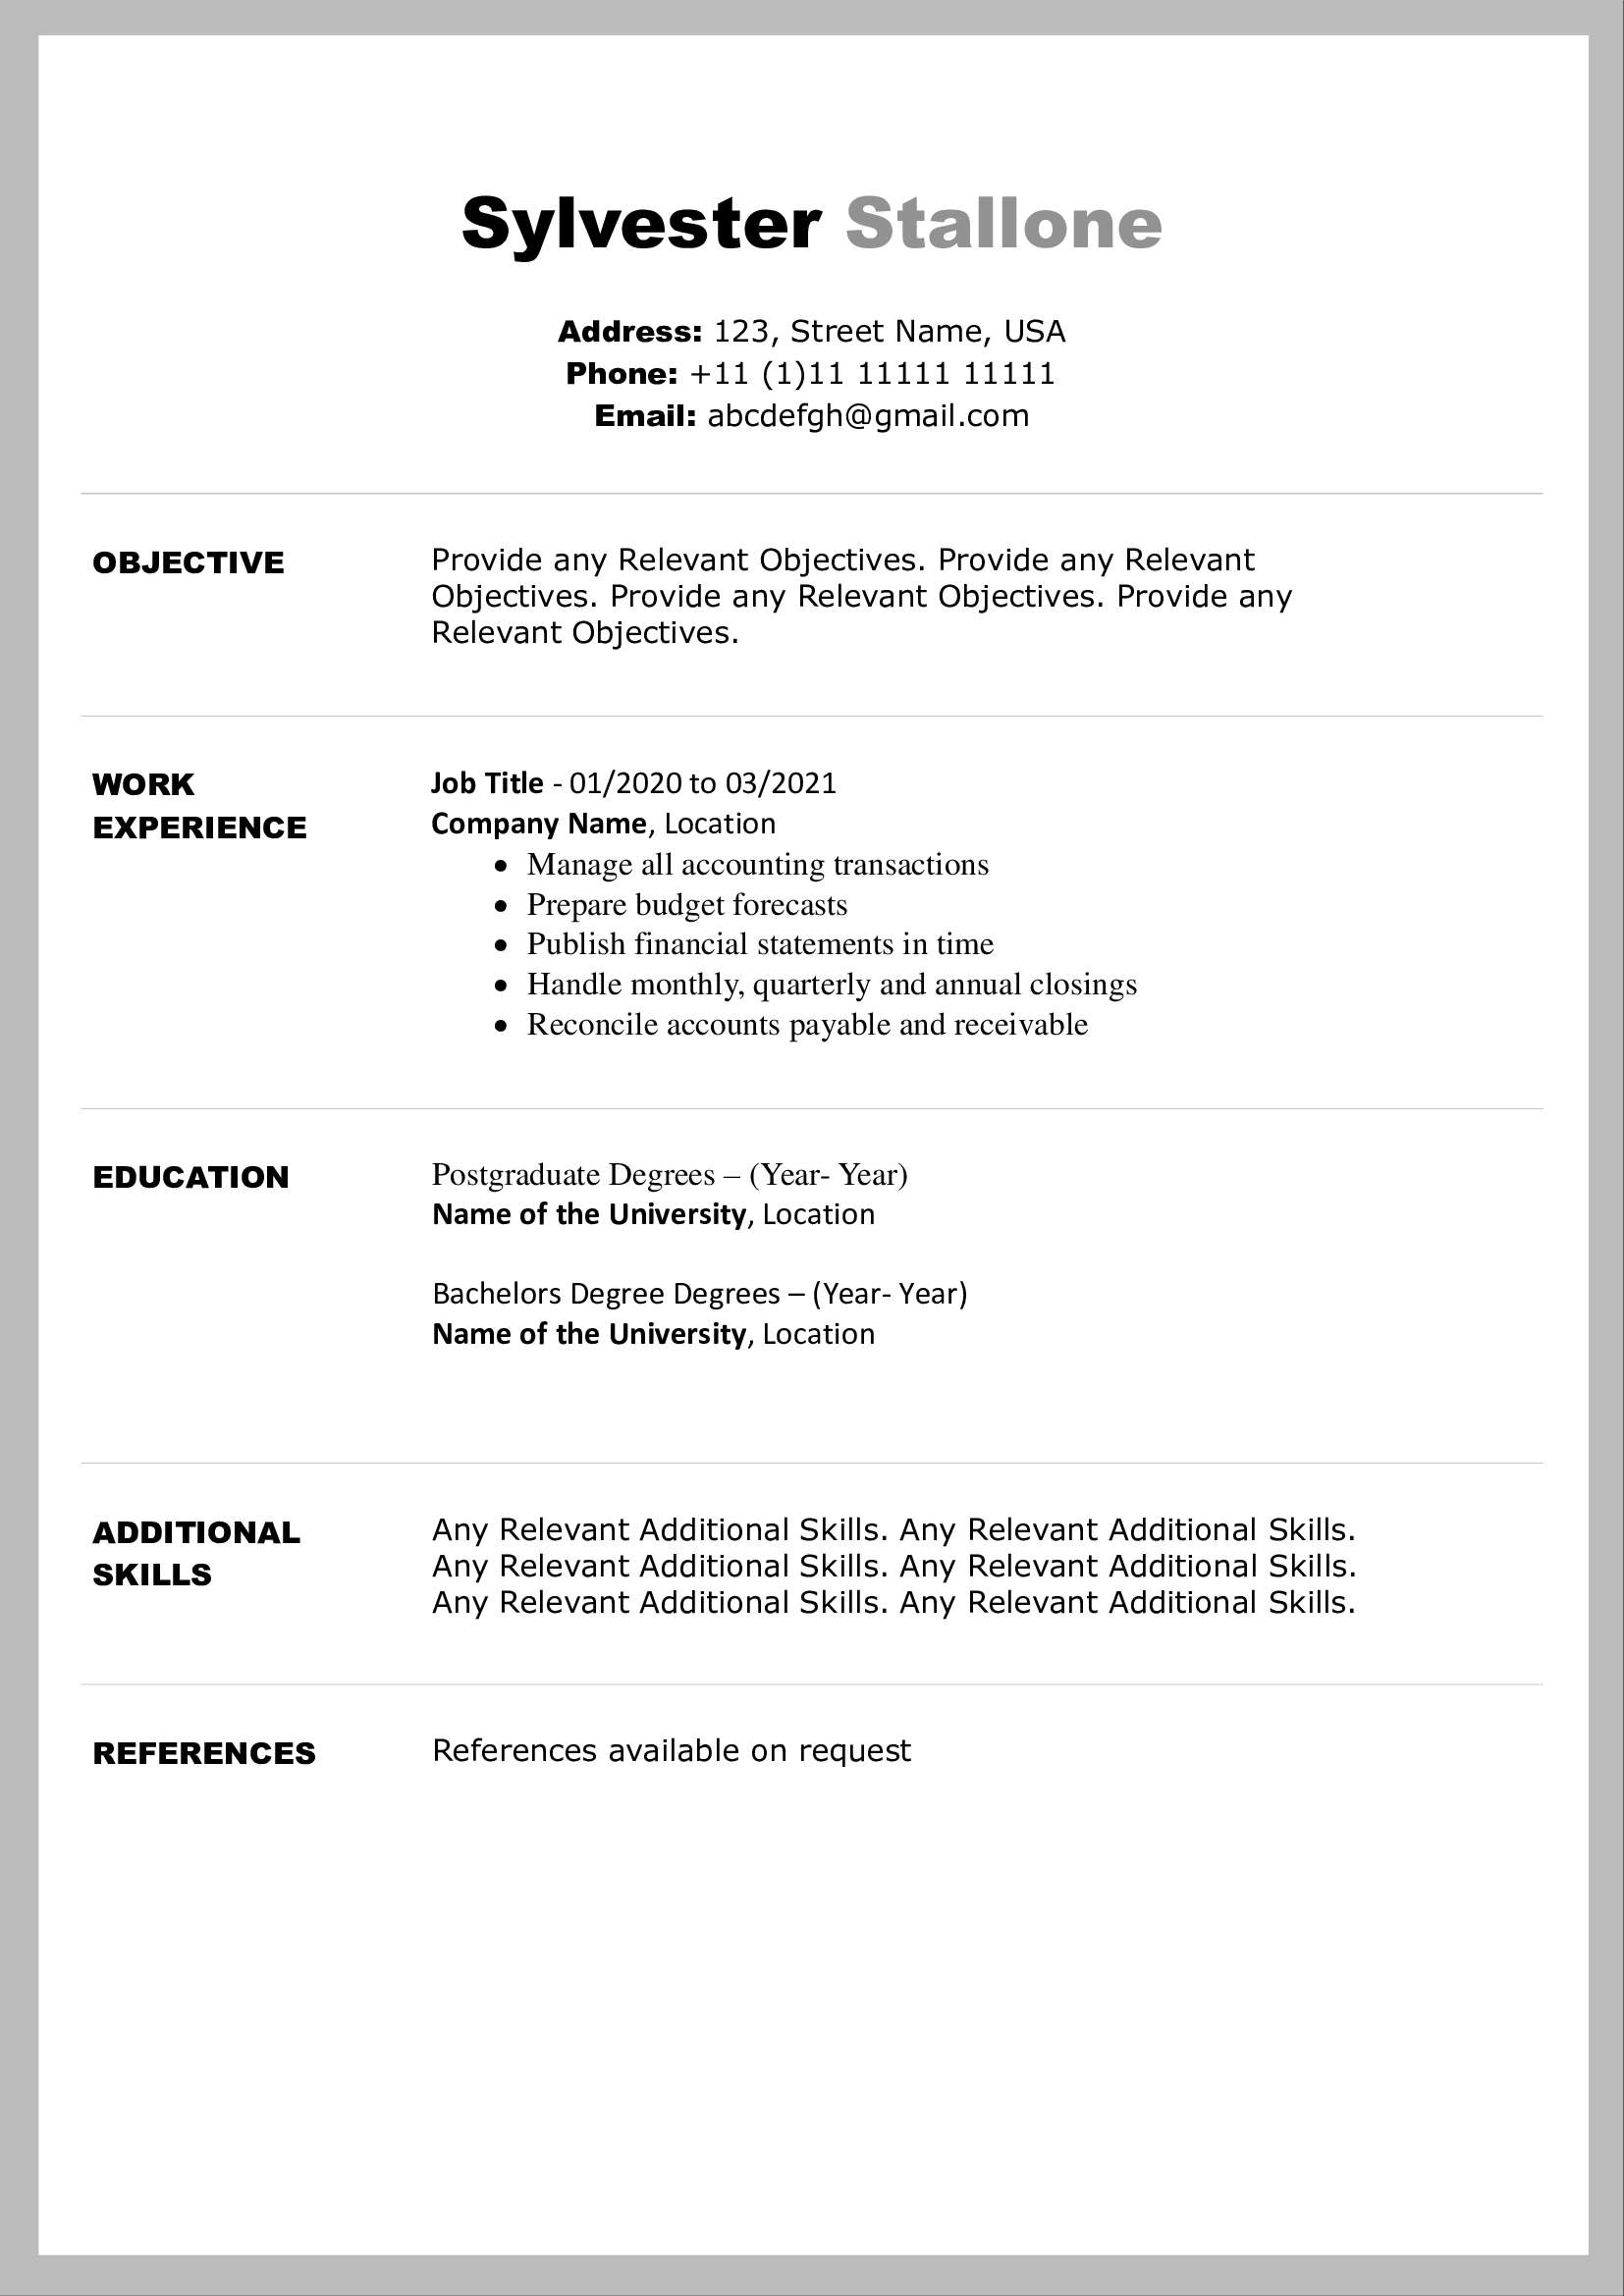 Free Download Professional CV Templates - Editable DOC - Sylvester Stallone